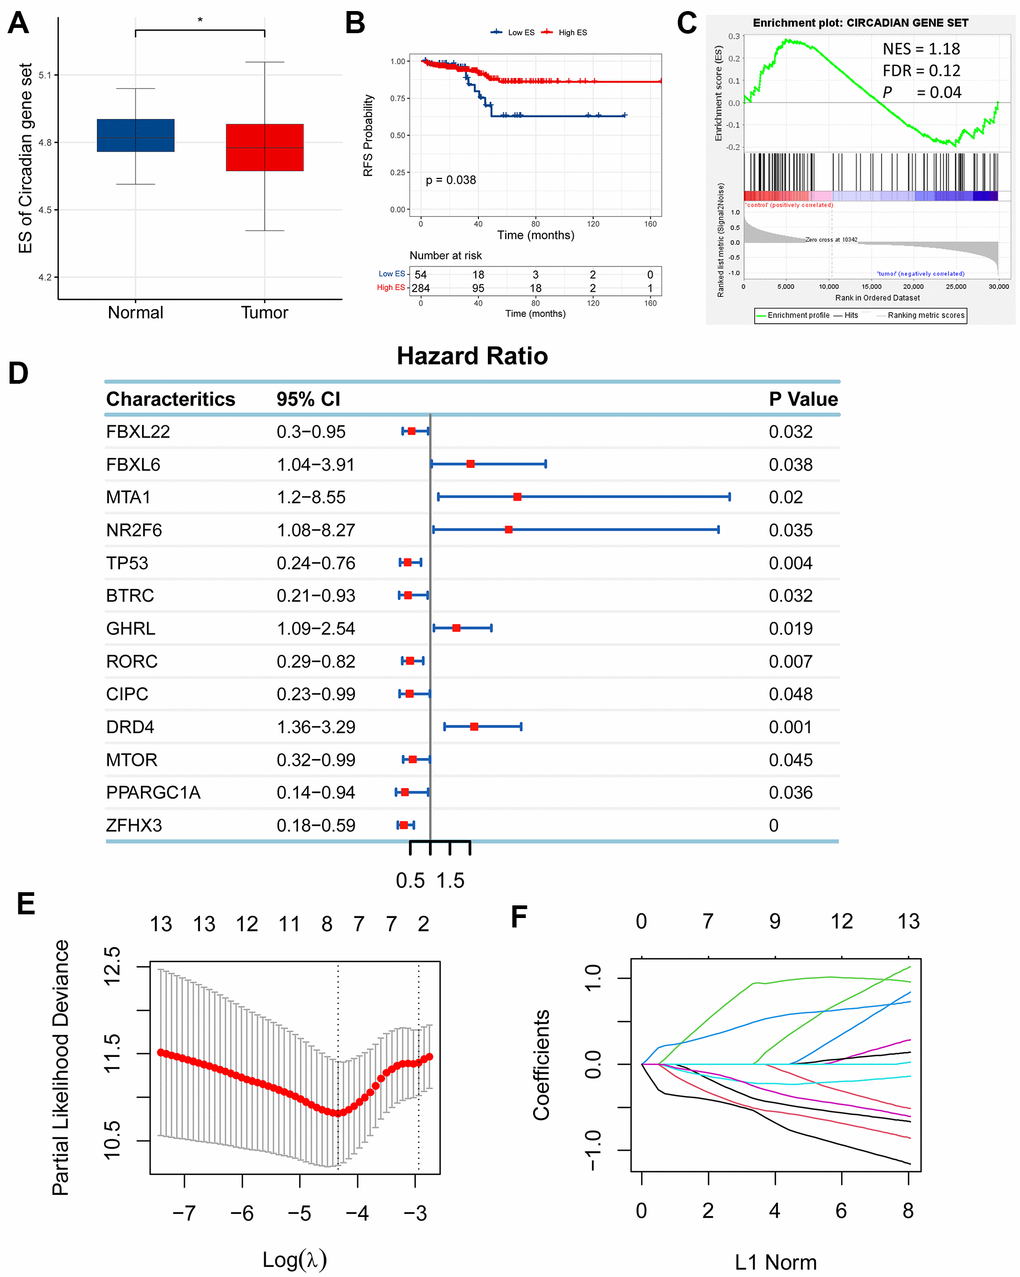 Establishment of a circadian rhythm- (CR-) related gene signature in prostate adenocarcinoma (PRAD). (A) Enrichment score (ES) of CR-related gene set was significantly enriched in normal tissue than tumor tissue. (B) High-ES patients had an improved relapse-free survival (RFS) than their counterparts. (C) CR-related gene set was positively enriched in normal tissue compared with tumor tissue. (D) 13 CR-related genes were qualified in univariate Cox regression analysis (FBXL22, FBXL6, MTA1, NR2F6, TP53, BTRC, GHRL, RORC, CIPC, DRD4, MTOR, PPARGC1A, ZFHX3; PE, F) 13 qualified genes were further filtered using LASSO regression analysis to eliminate multicollinearity and seven eligible genes (FBXL22, MTA1, TP53, RORC, DRD4, PPARGC1A, ZFHX3) were eventually acquired for establishment of a CR-related gene signature for predicting RFS in PRAD patients.